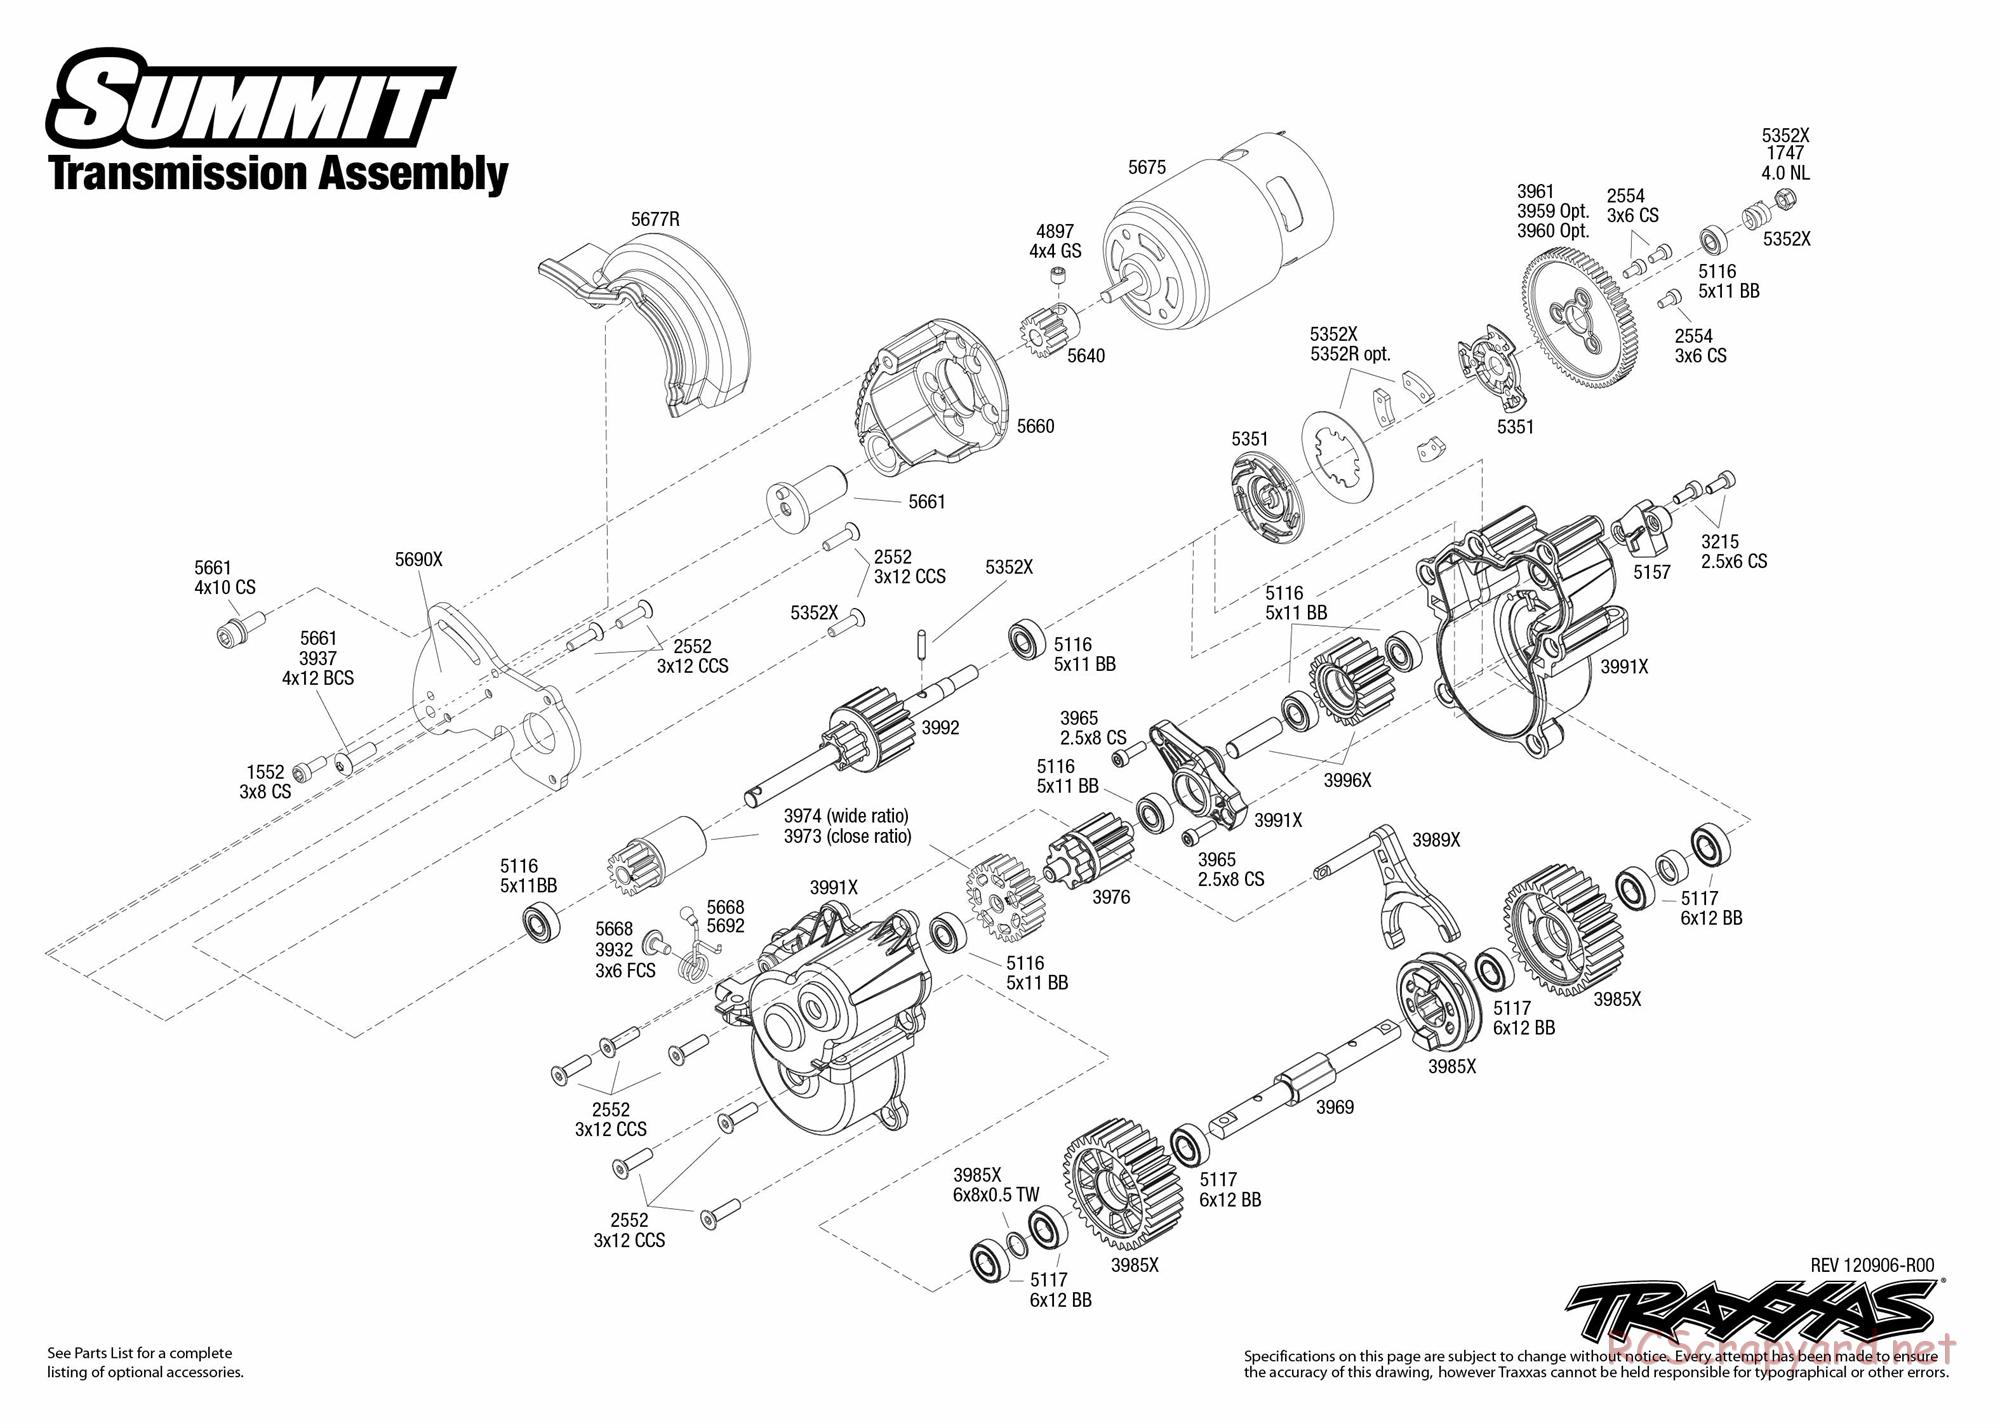 Traxxas - Summit LiPo (2012) - Exploded Views - Page 6